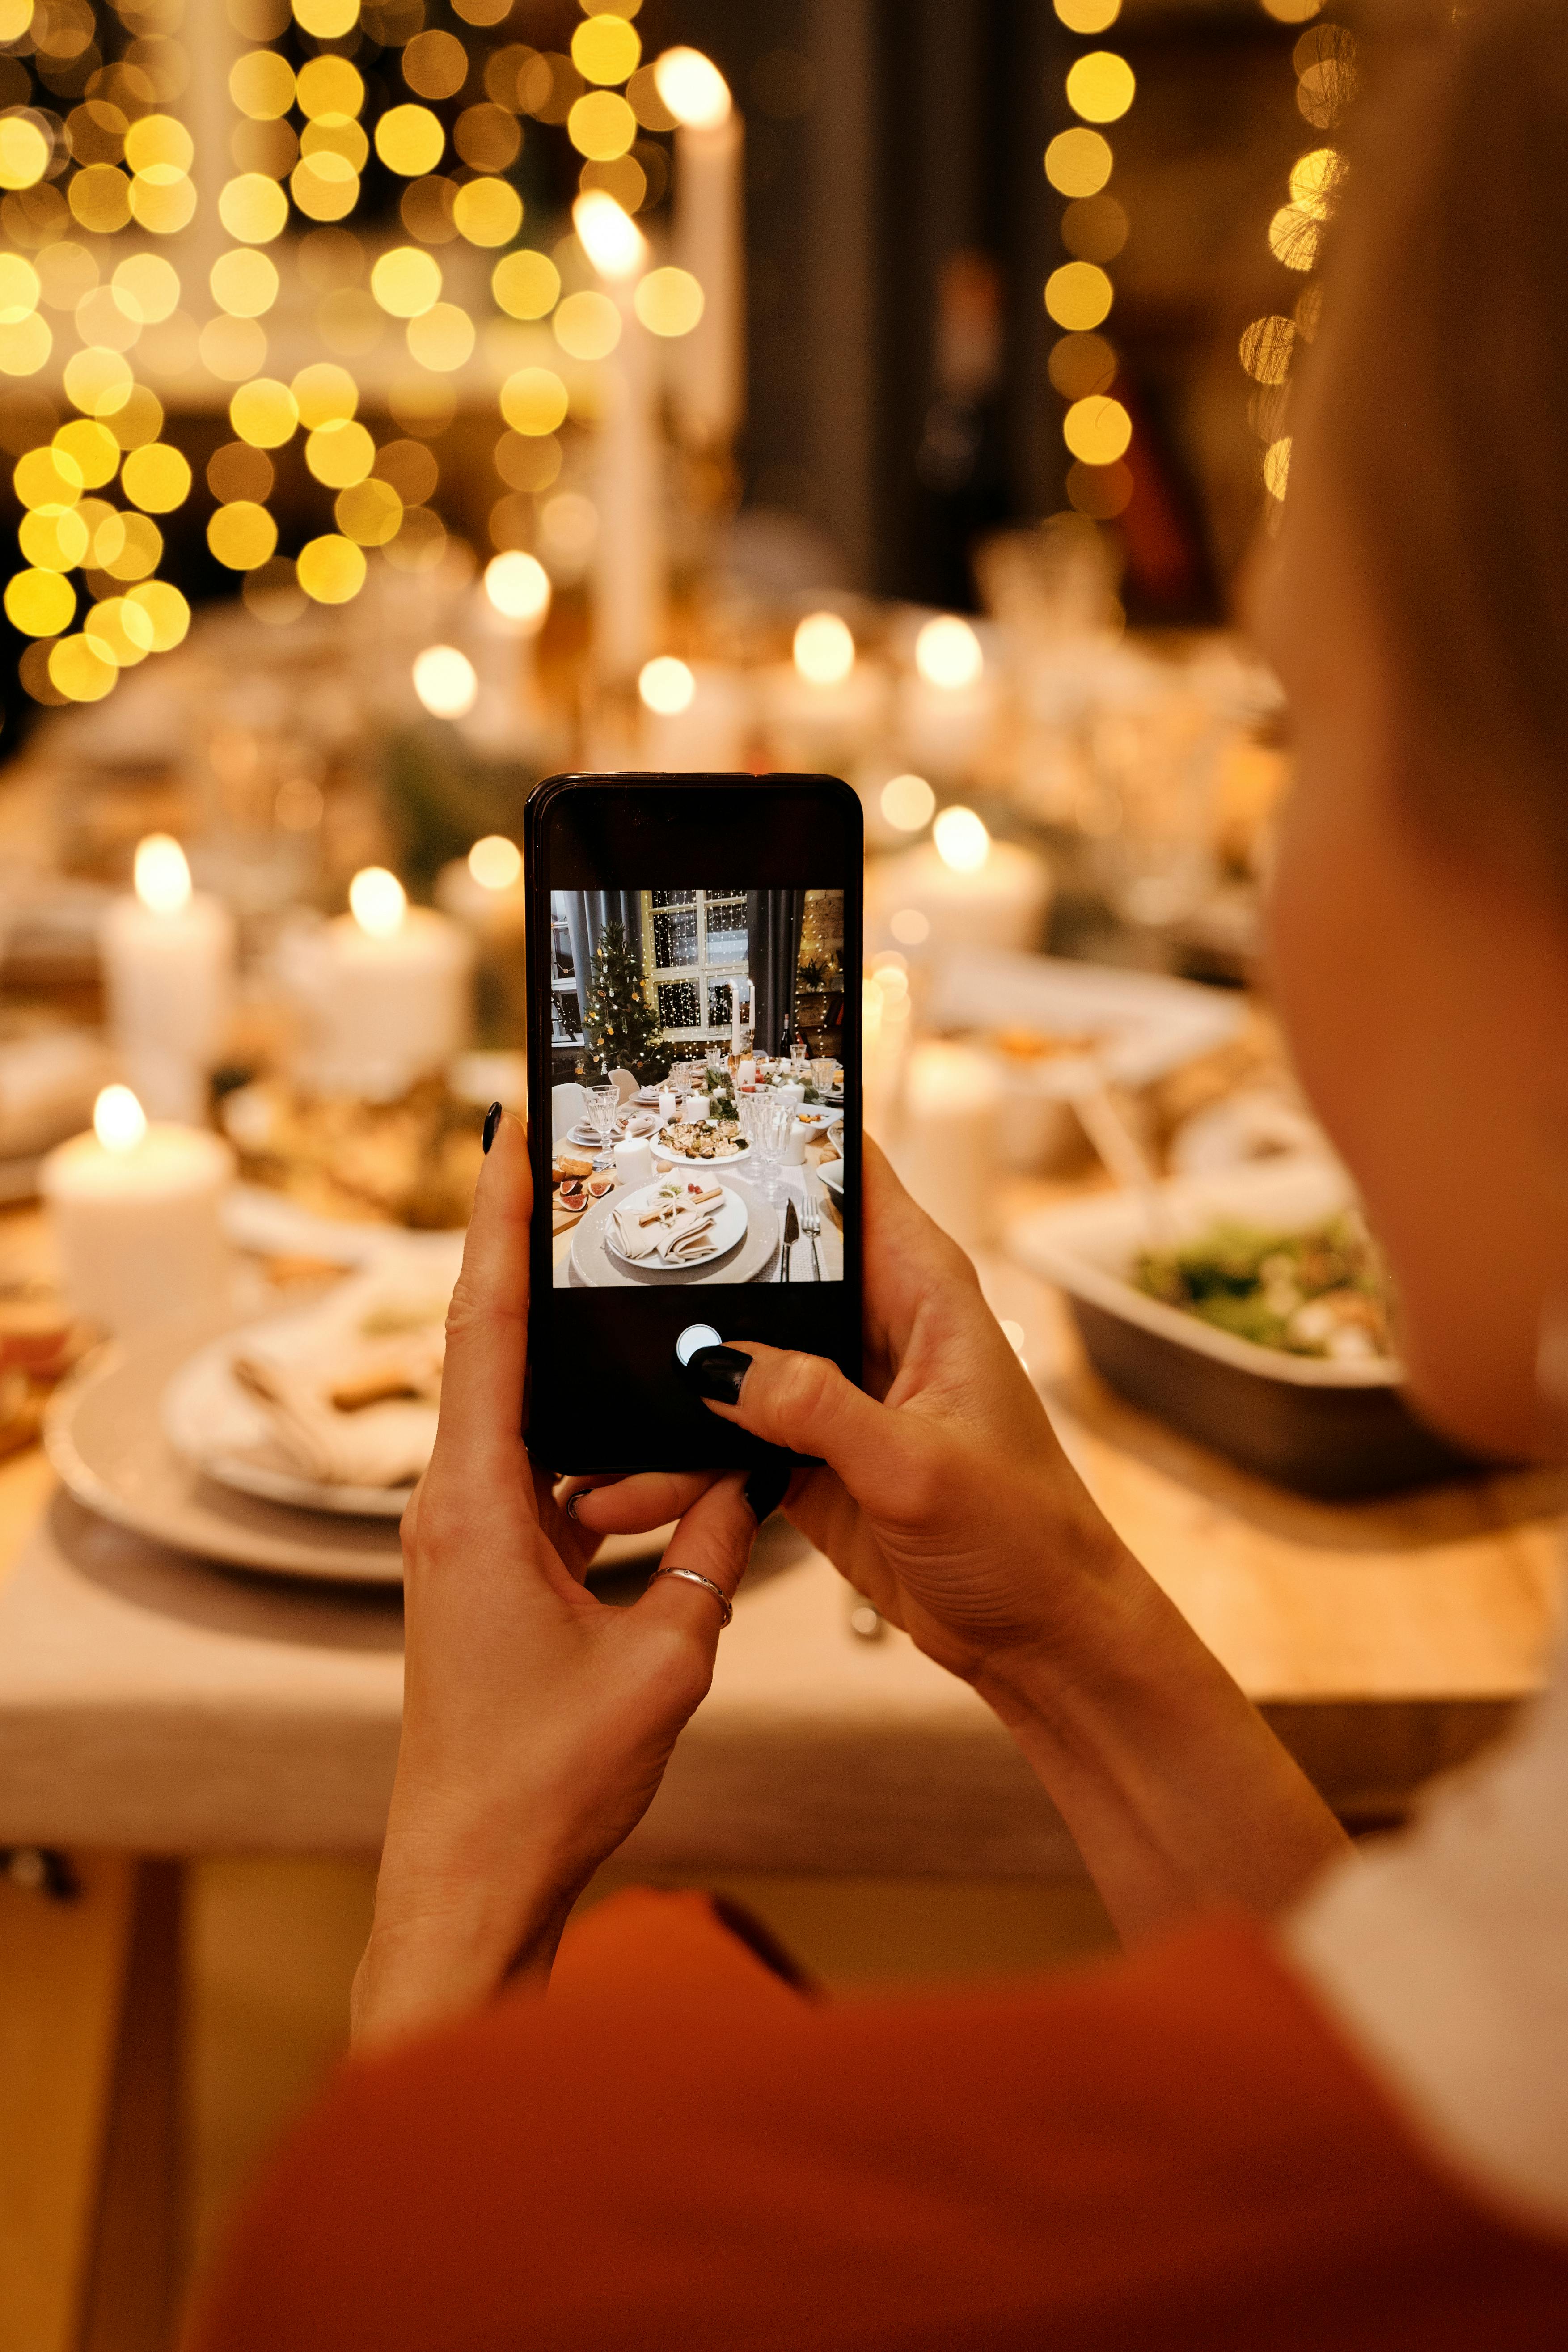 A hand holding a cellphone and taking a photo of a dinner setting | Source: Pexels